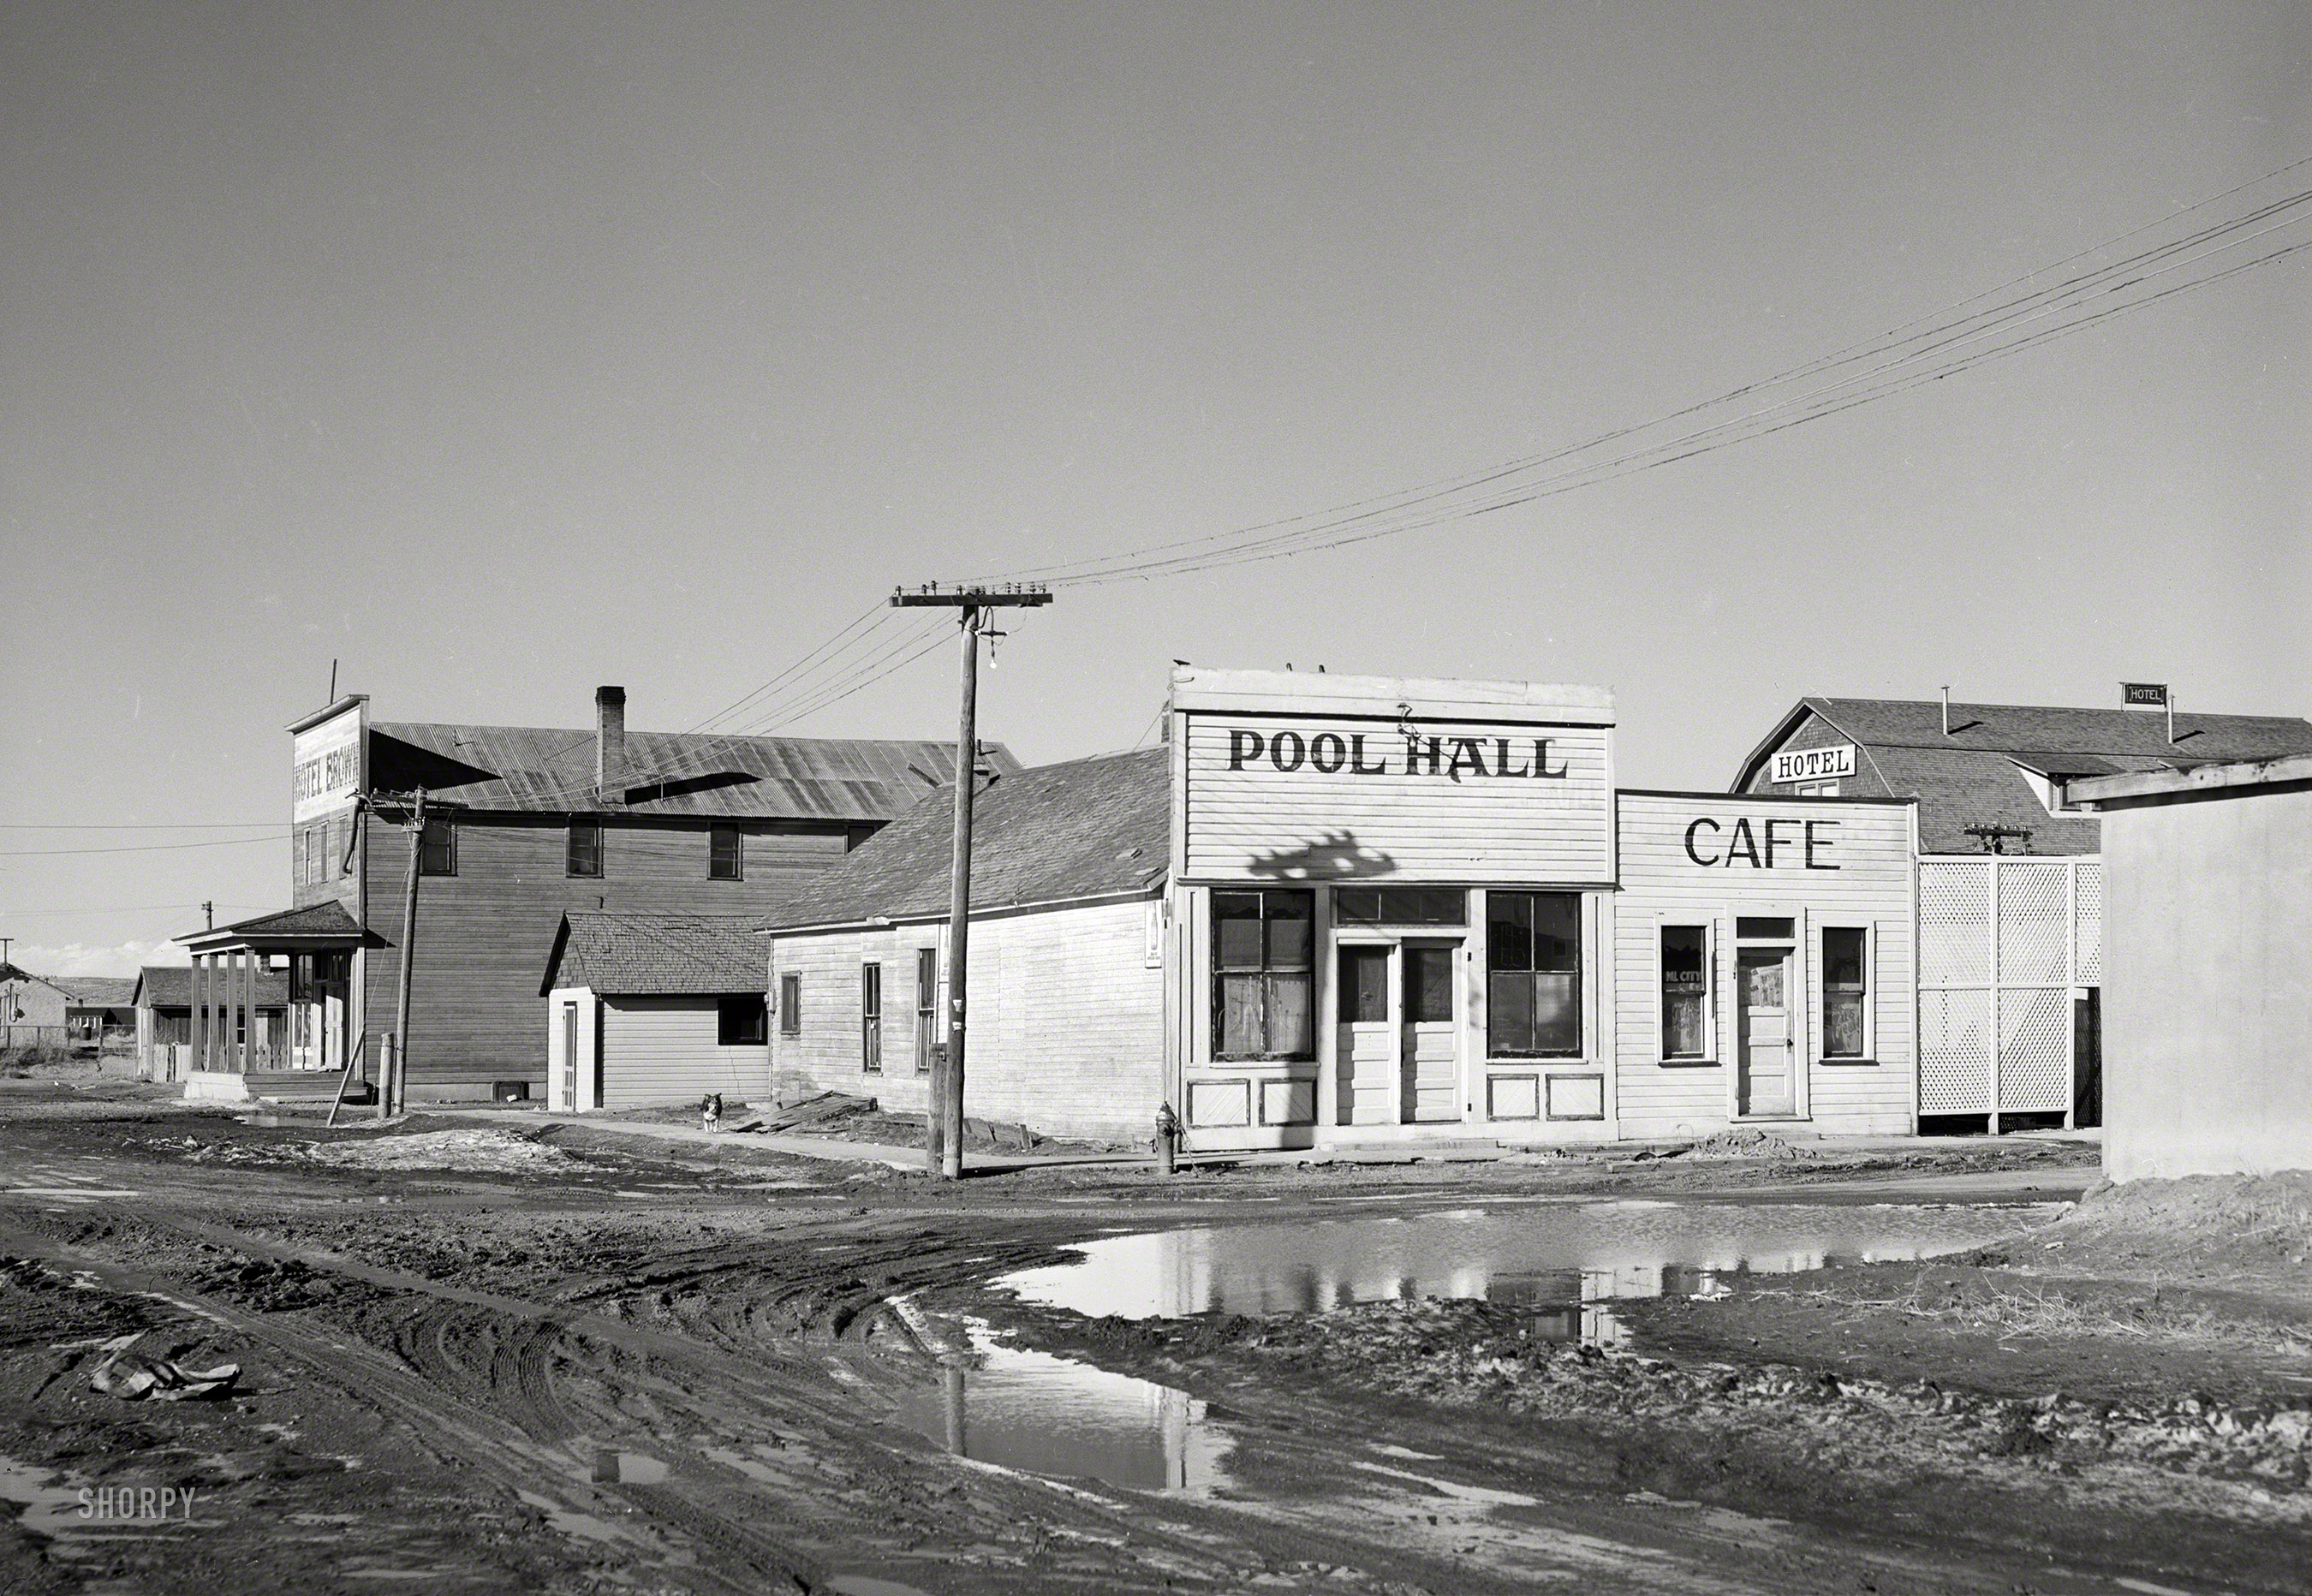 March 1940. "Medicine Bow, Wyoming." Generic medicine, evidently. Photo by Arthur Rothstein for the Farm Security Administration. View full size.